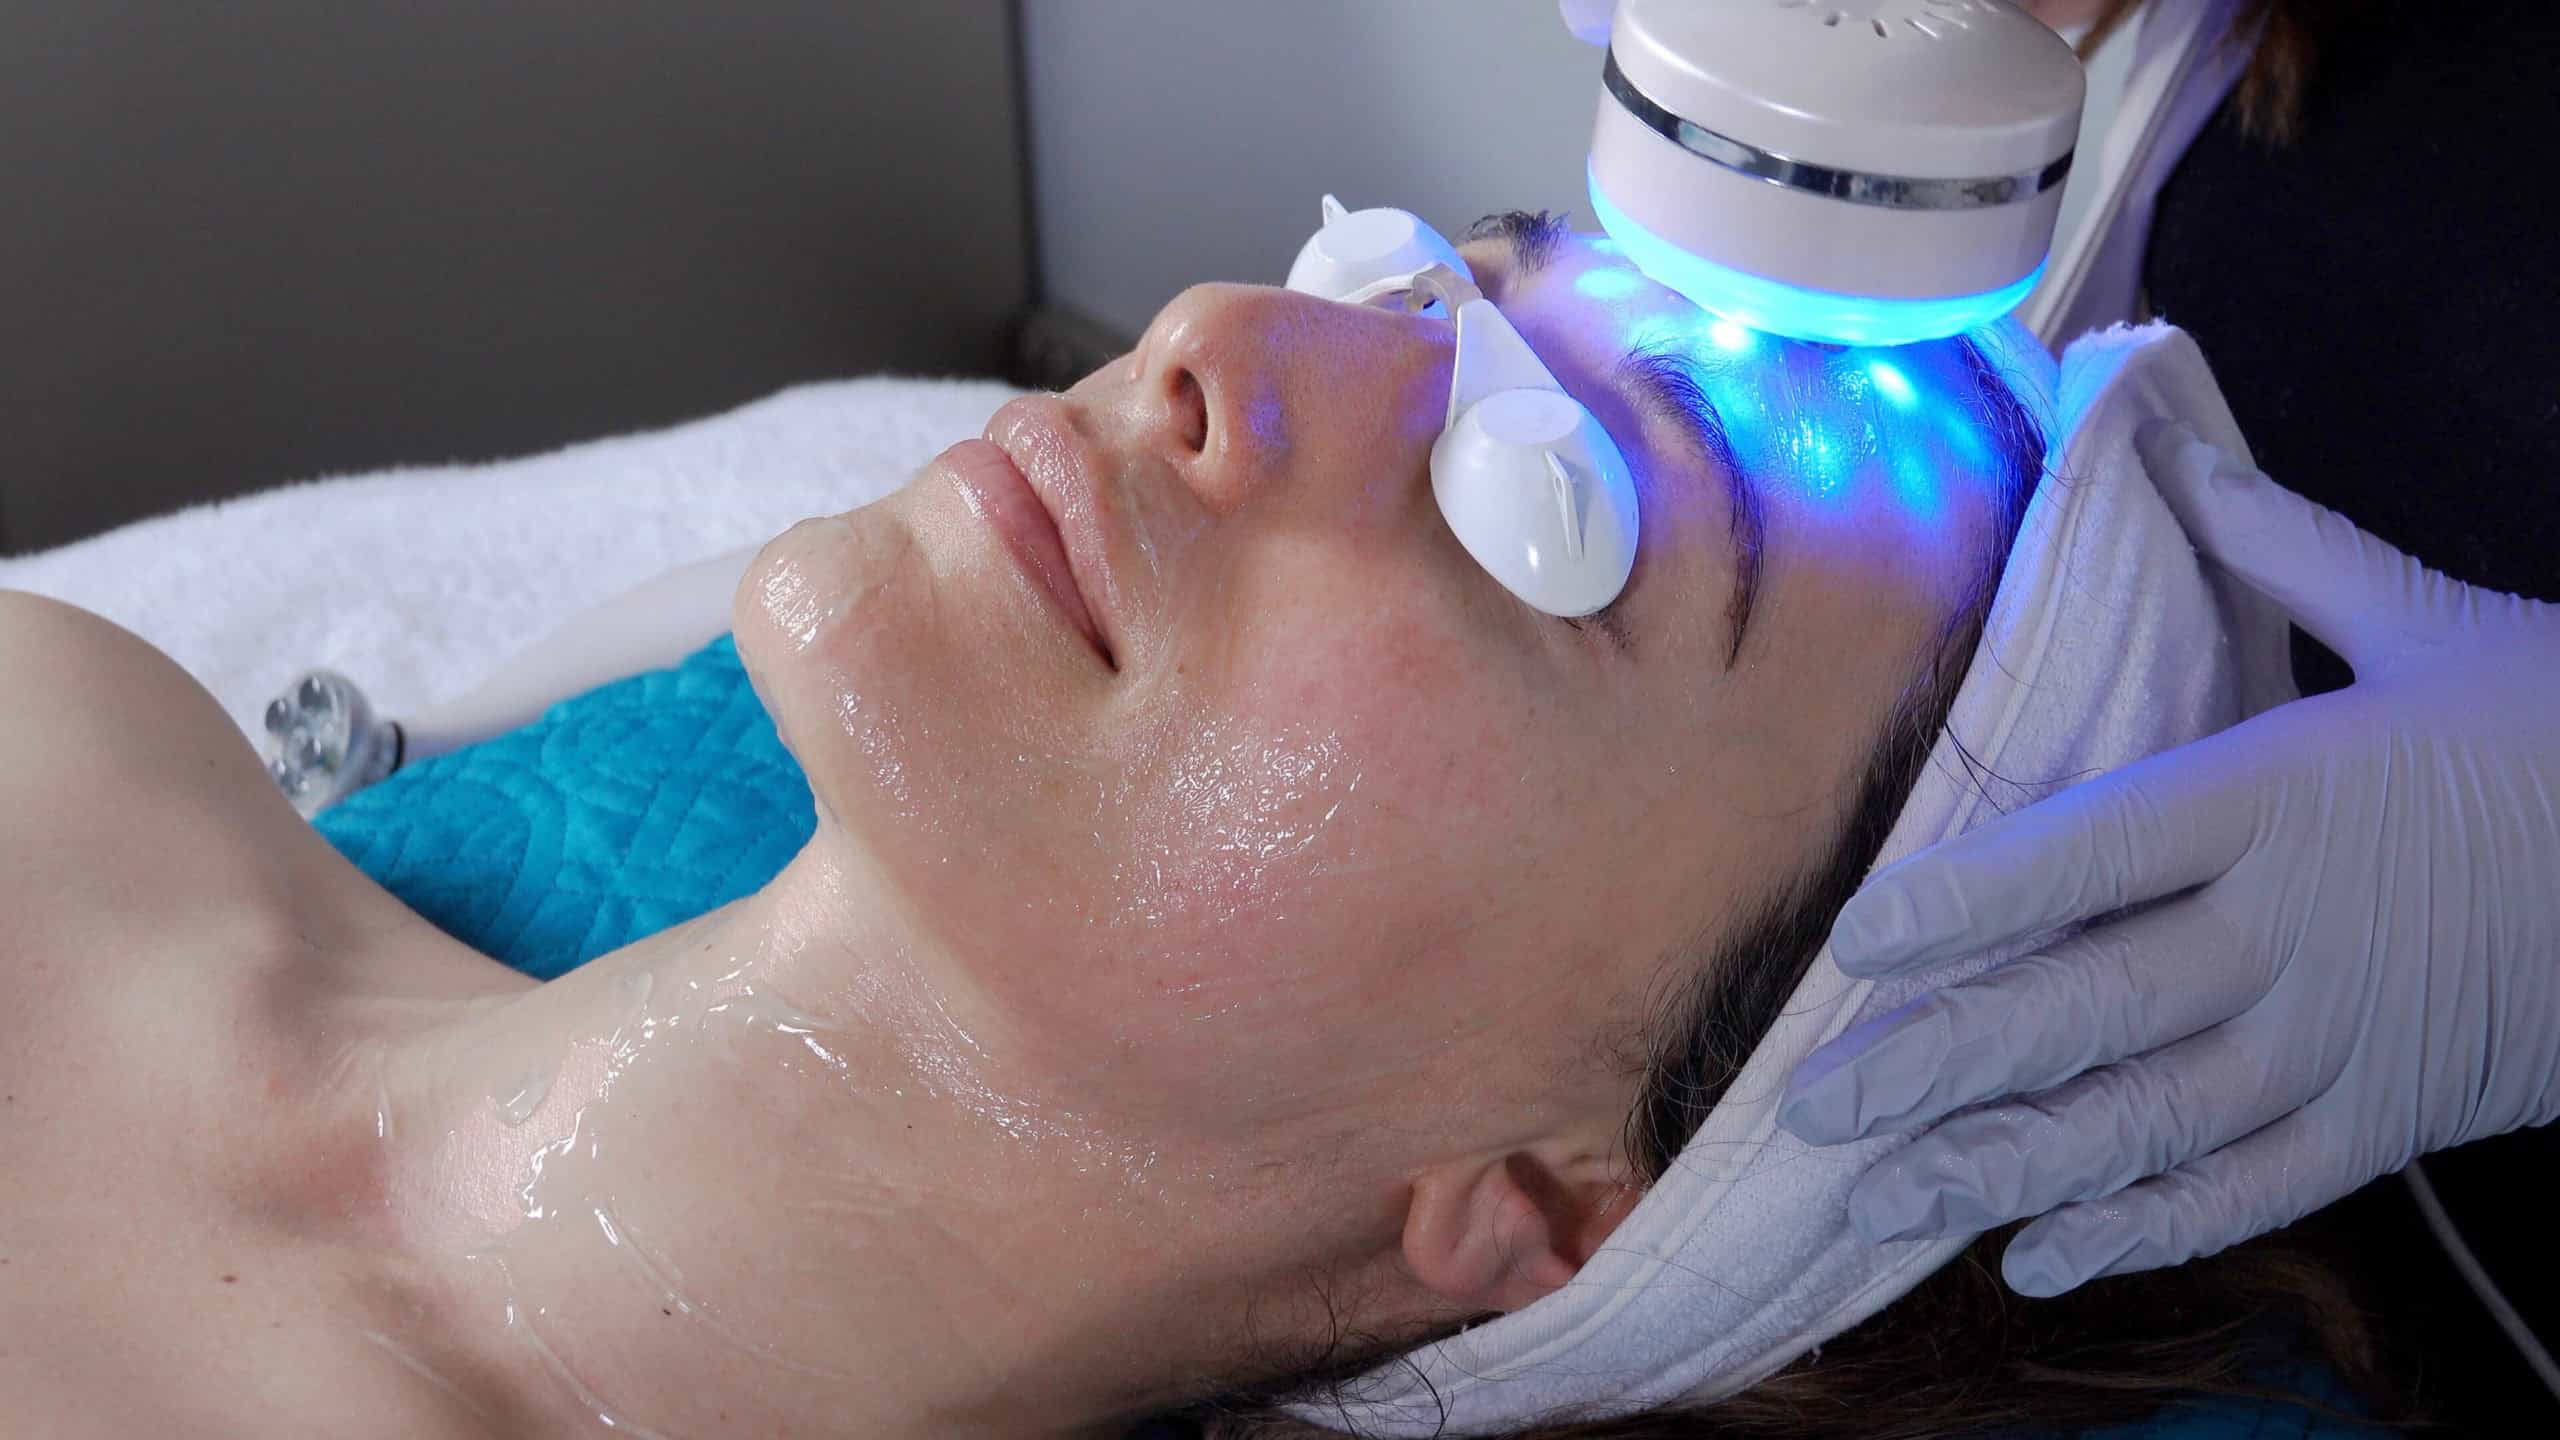 LED lights: Are they a cure for your skin woes? - Harvard Health